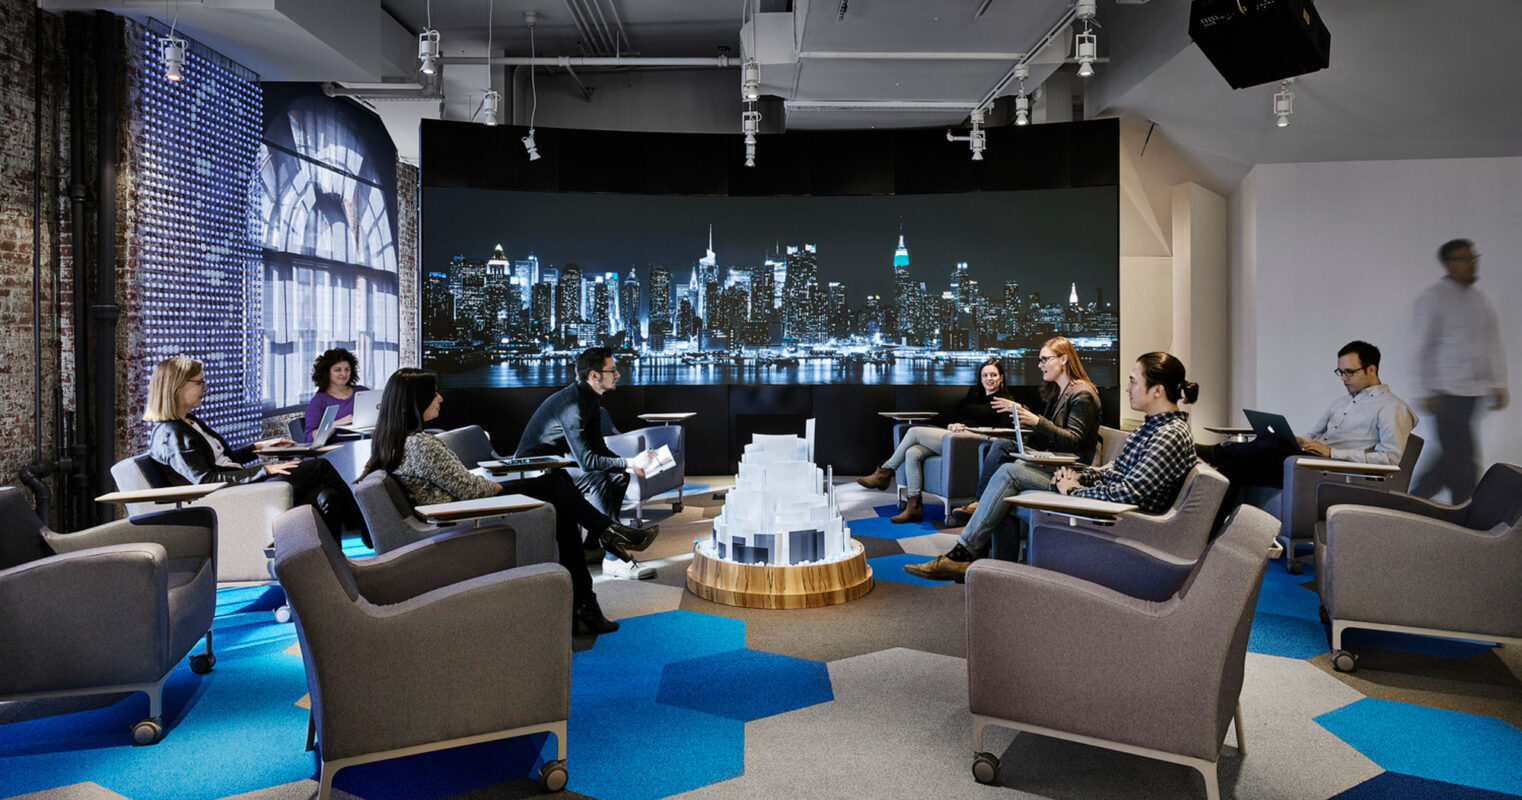 Modern office lounge featuring angular furniture with plush, blue and gray upholstery, complemented by vibrant blue carpet tiles and illuminated by overhead spotlights. A large city skyline mural anchors the space, while a scale model on the central wooden table draws interest.